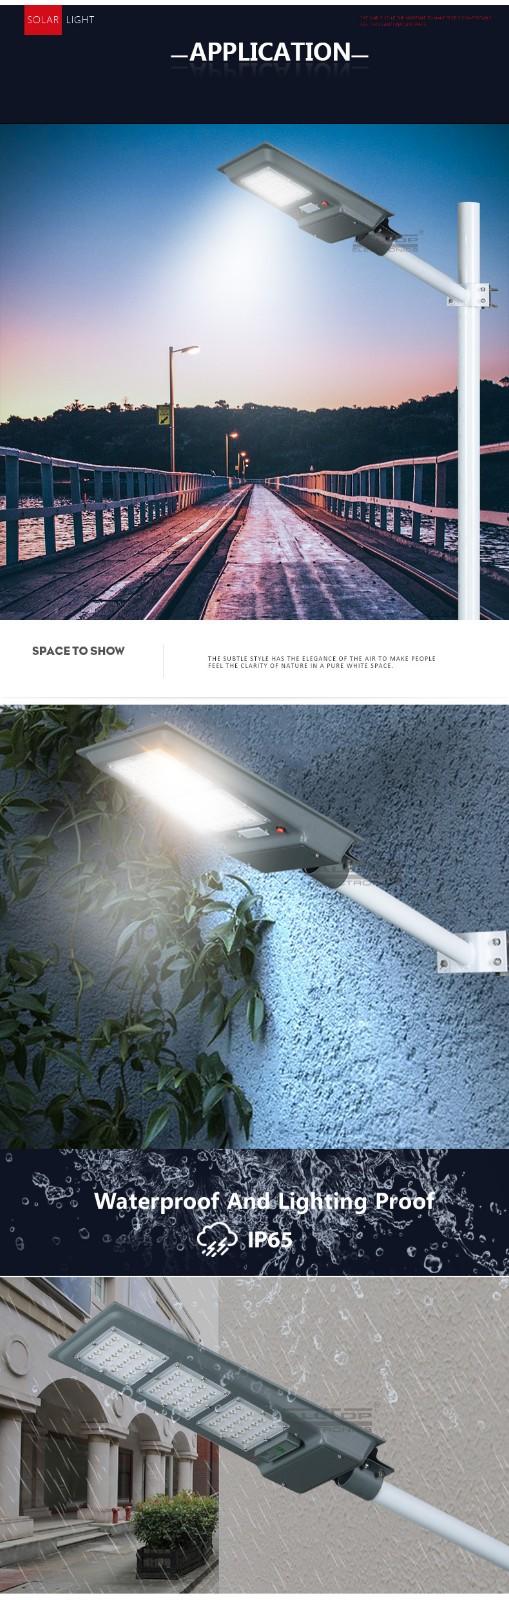 ALLTOP all in one solar light series for road